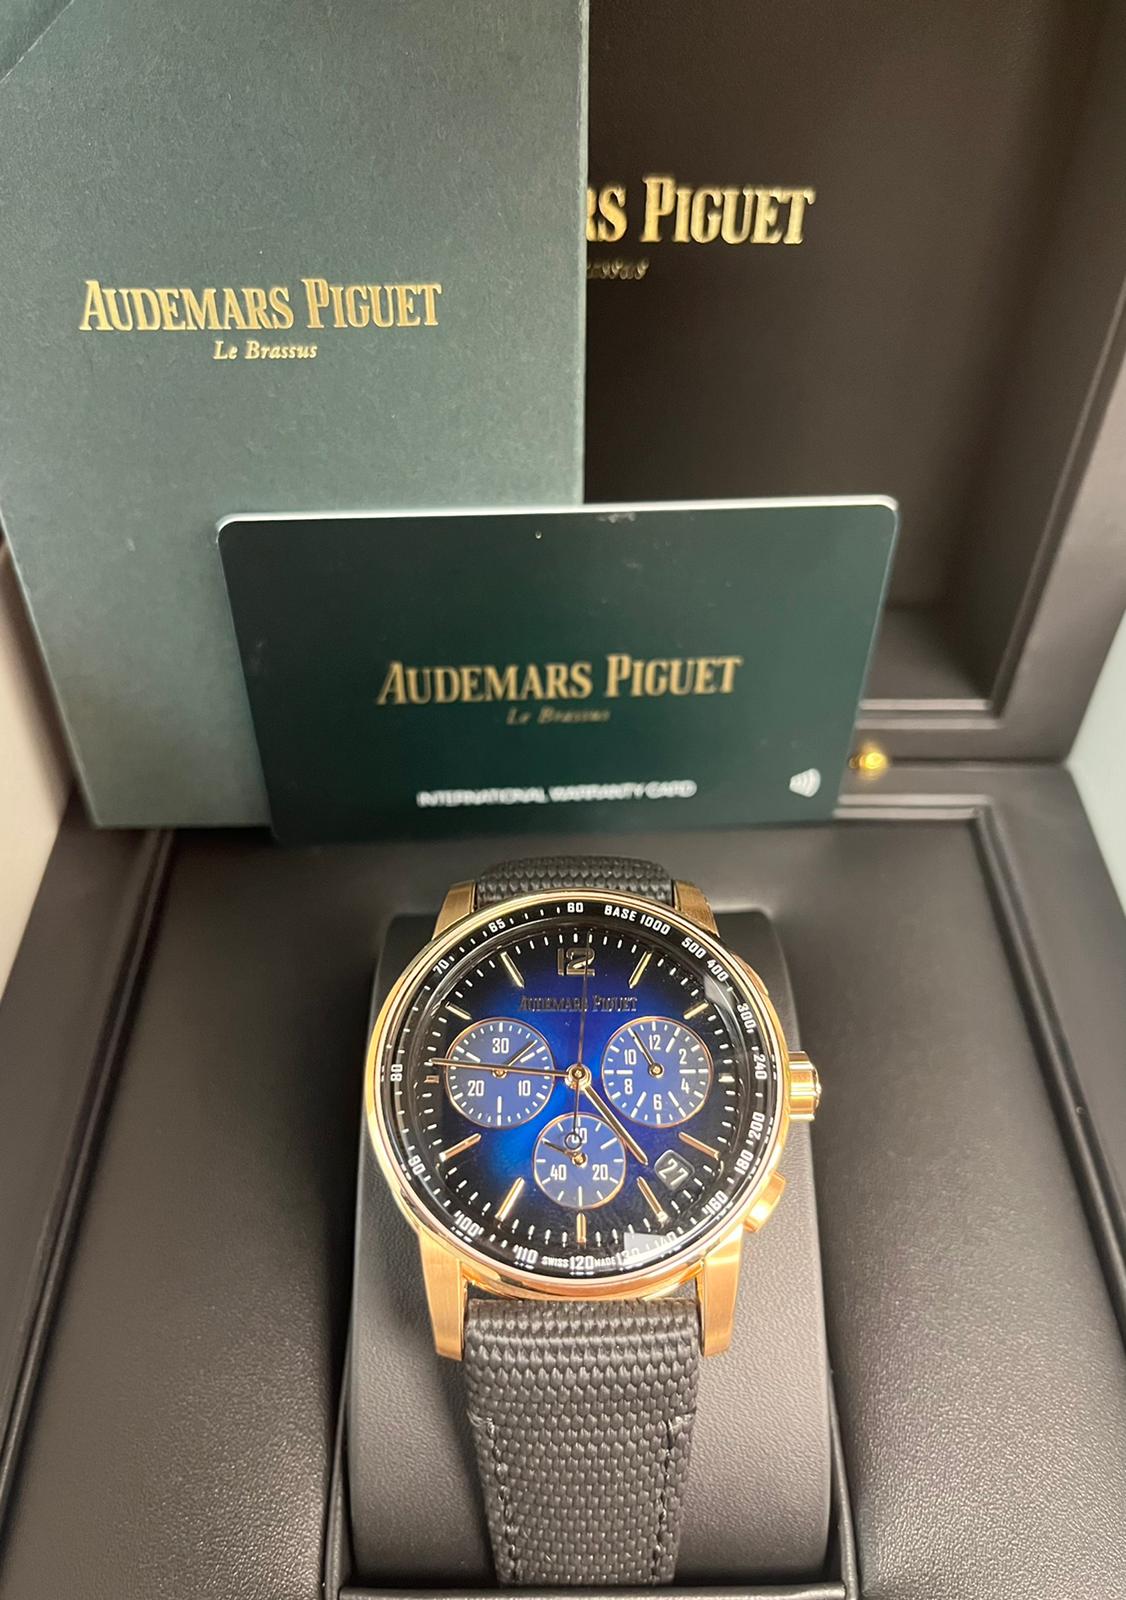 Audemars Piguet Code 11.59 Chronograph Rose Gold Men’s Watch (Reference # 26393OR.OO.A002KB) - WatchesOff5thWatch